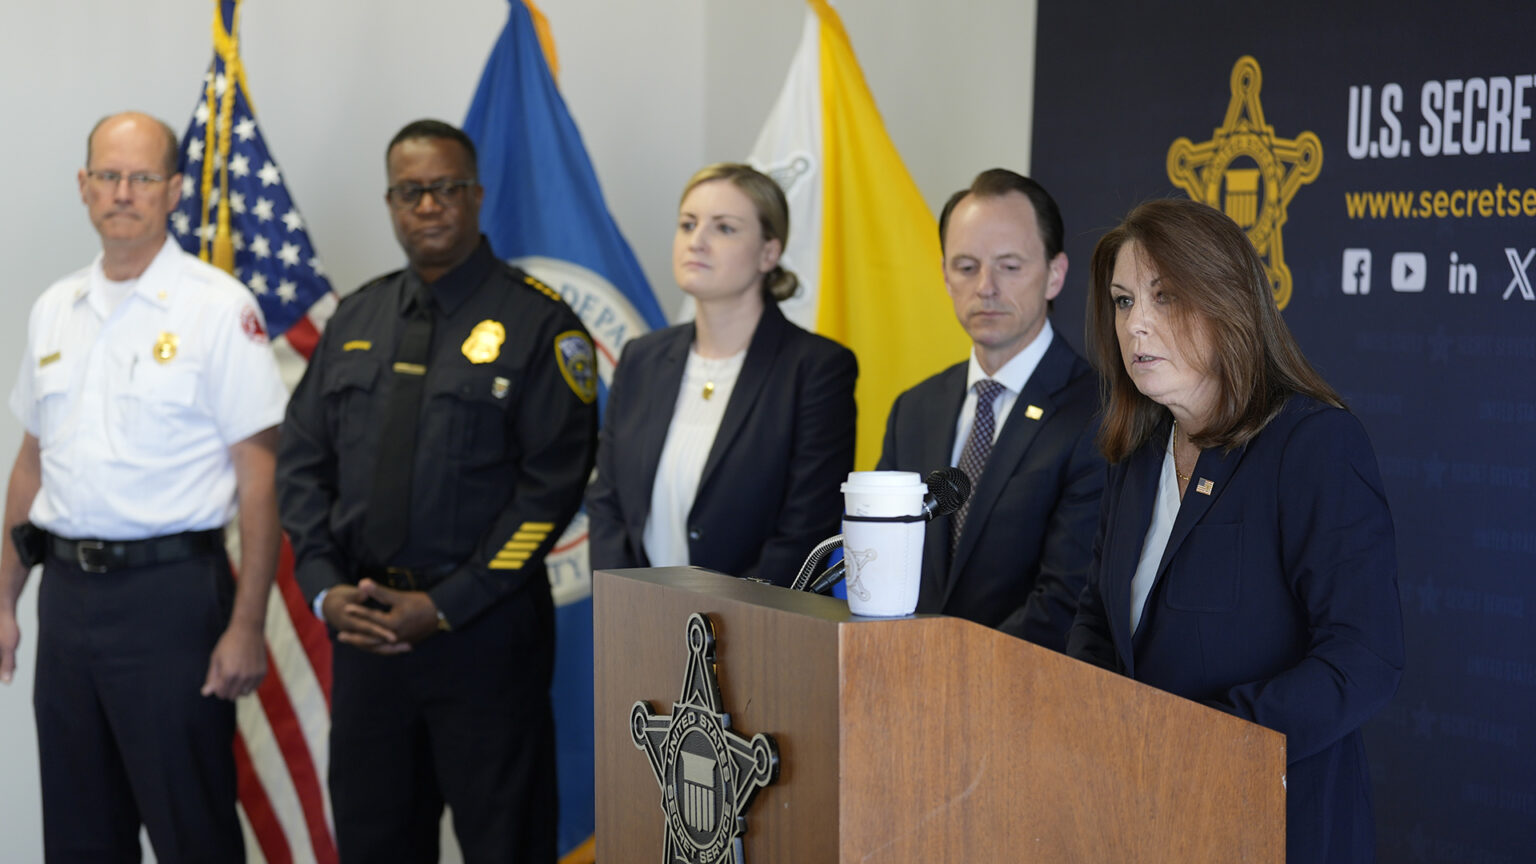 Kimberly Cheatle speaks while standing behind a wood podium with the seal of the U.S. Secret Service affixed to its front, with four other people standing to her side in a room with the U.S., Wisconsin and Milwaukee flags in the background.